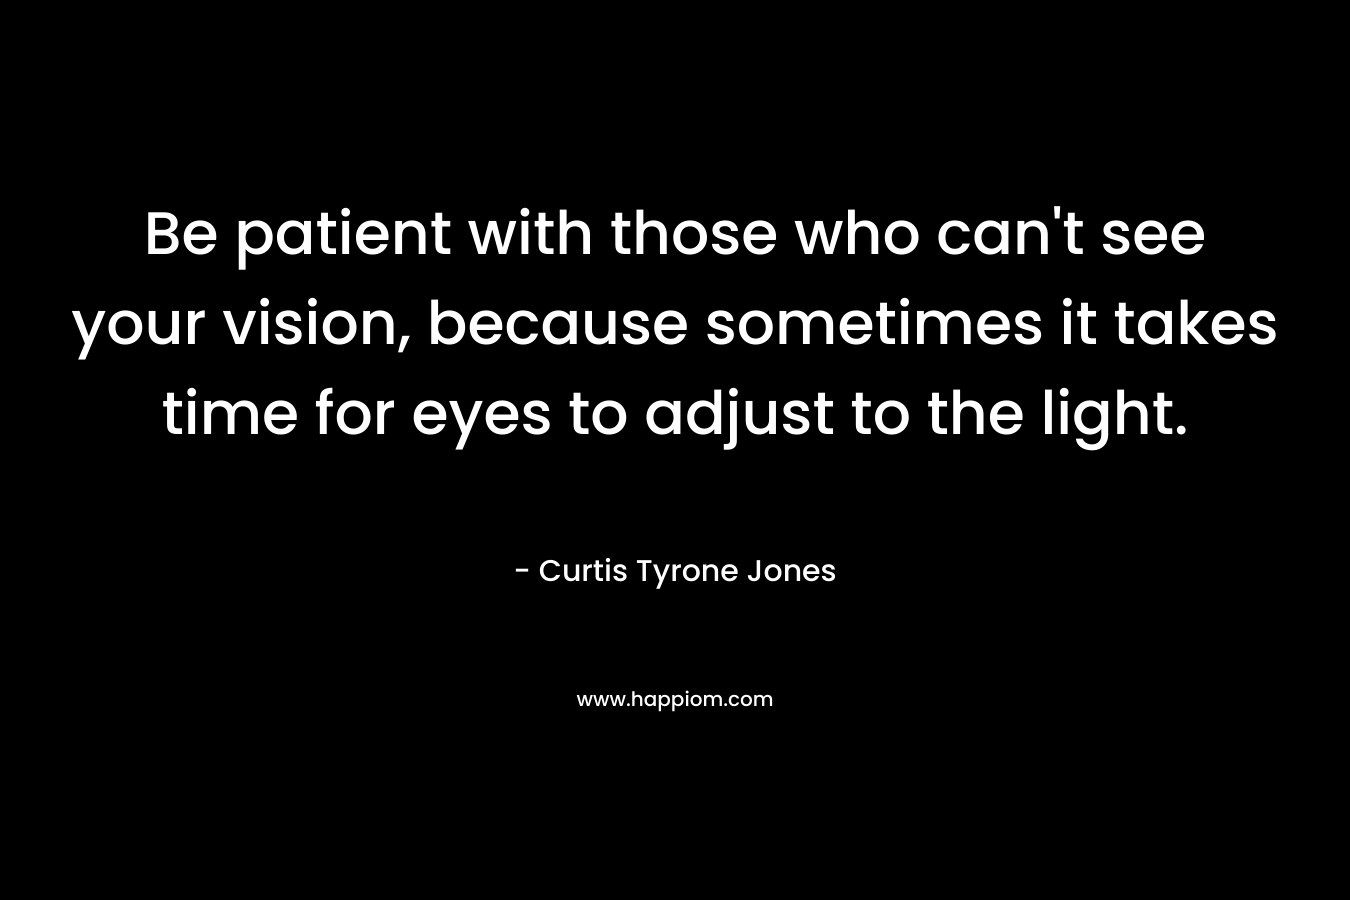 Be patient with those who can't see your vision, because sometimes it takes time for eyes to adjust to the light.